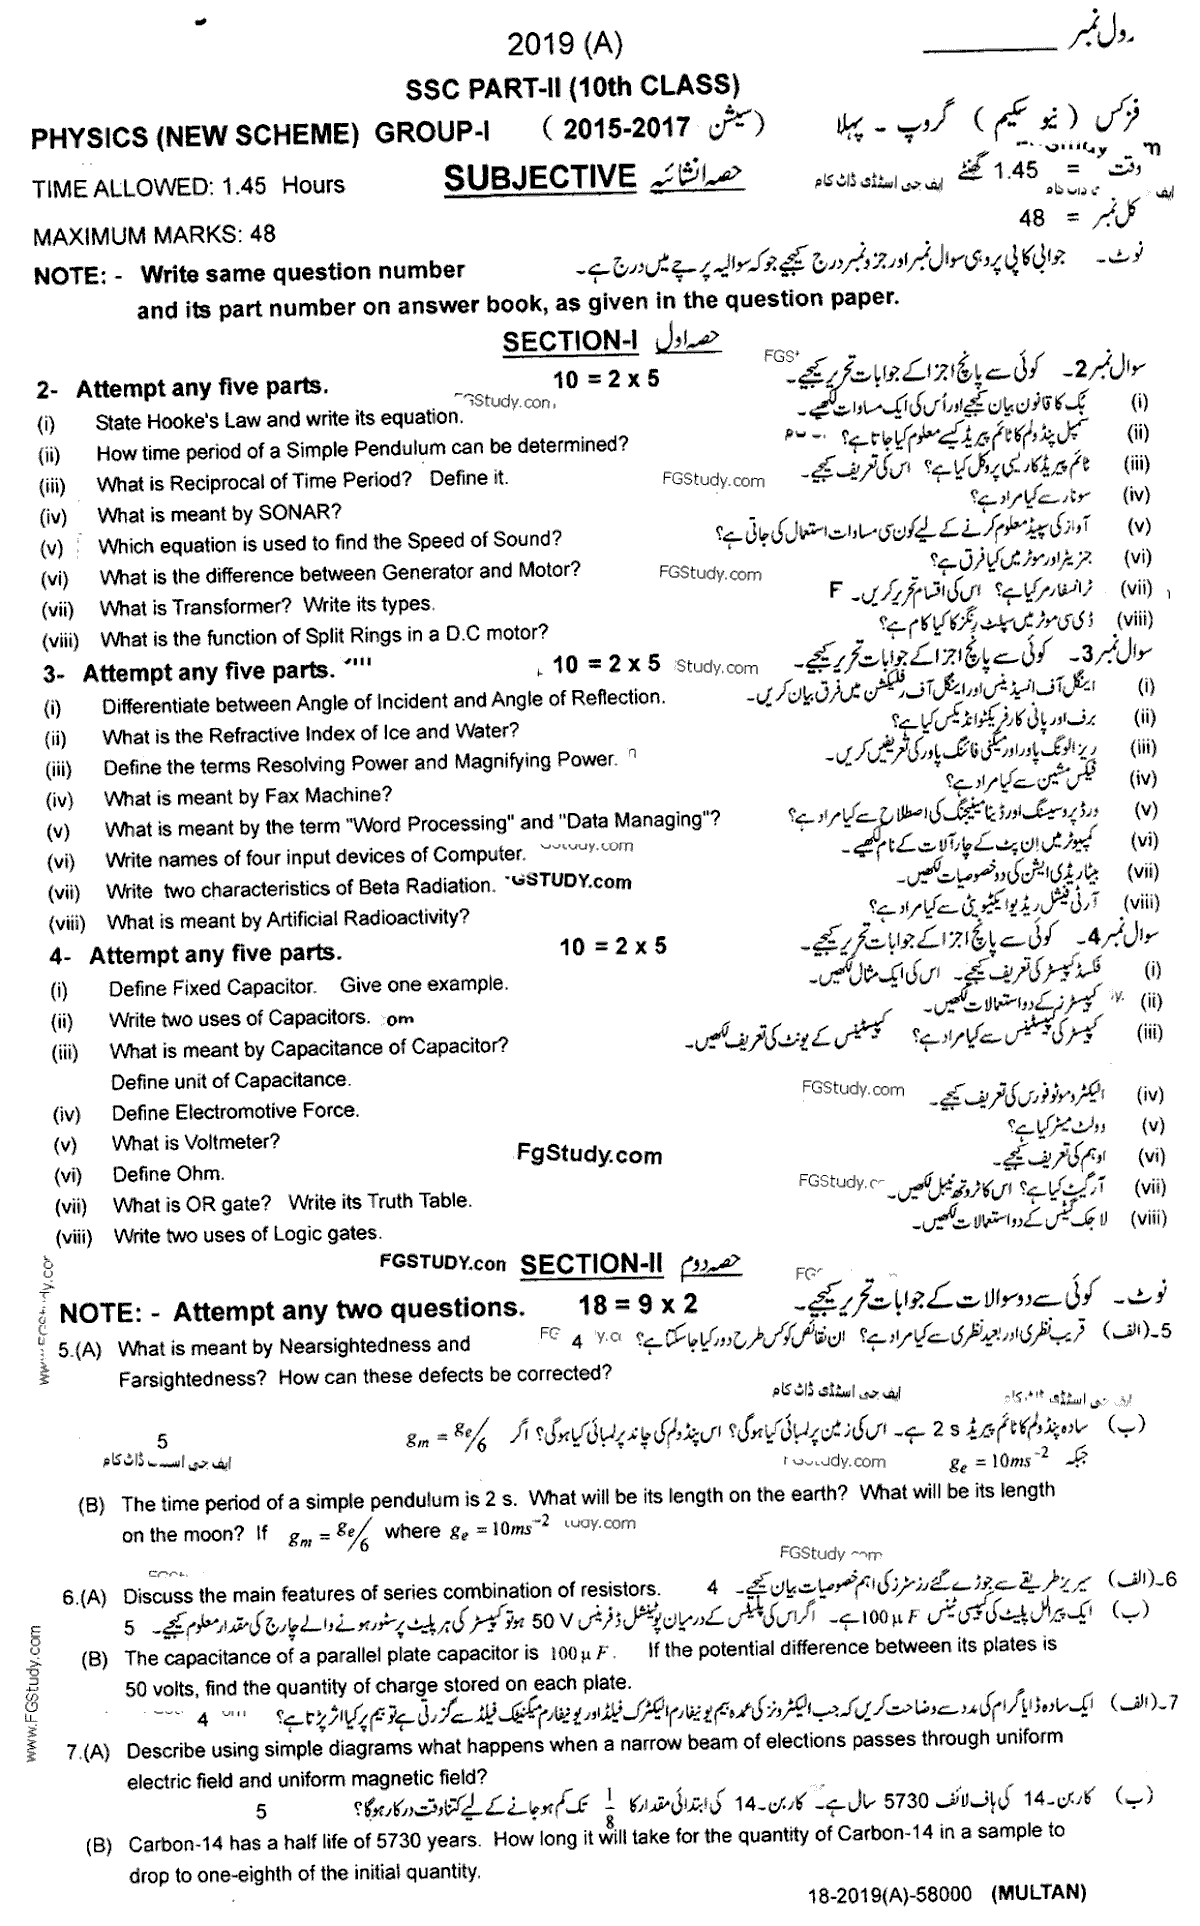 Physics Group 1 Subjective 10th Class Past Papers 2019